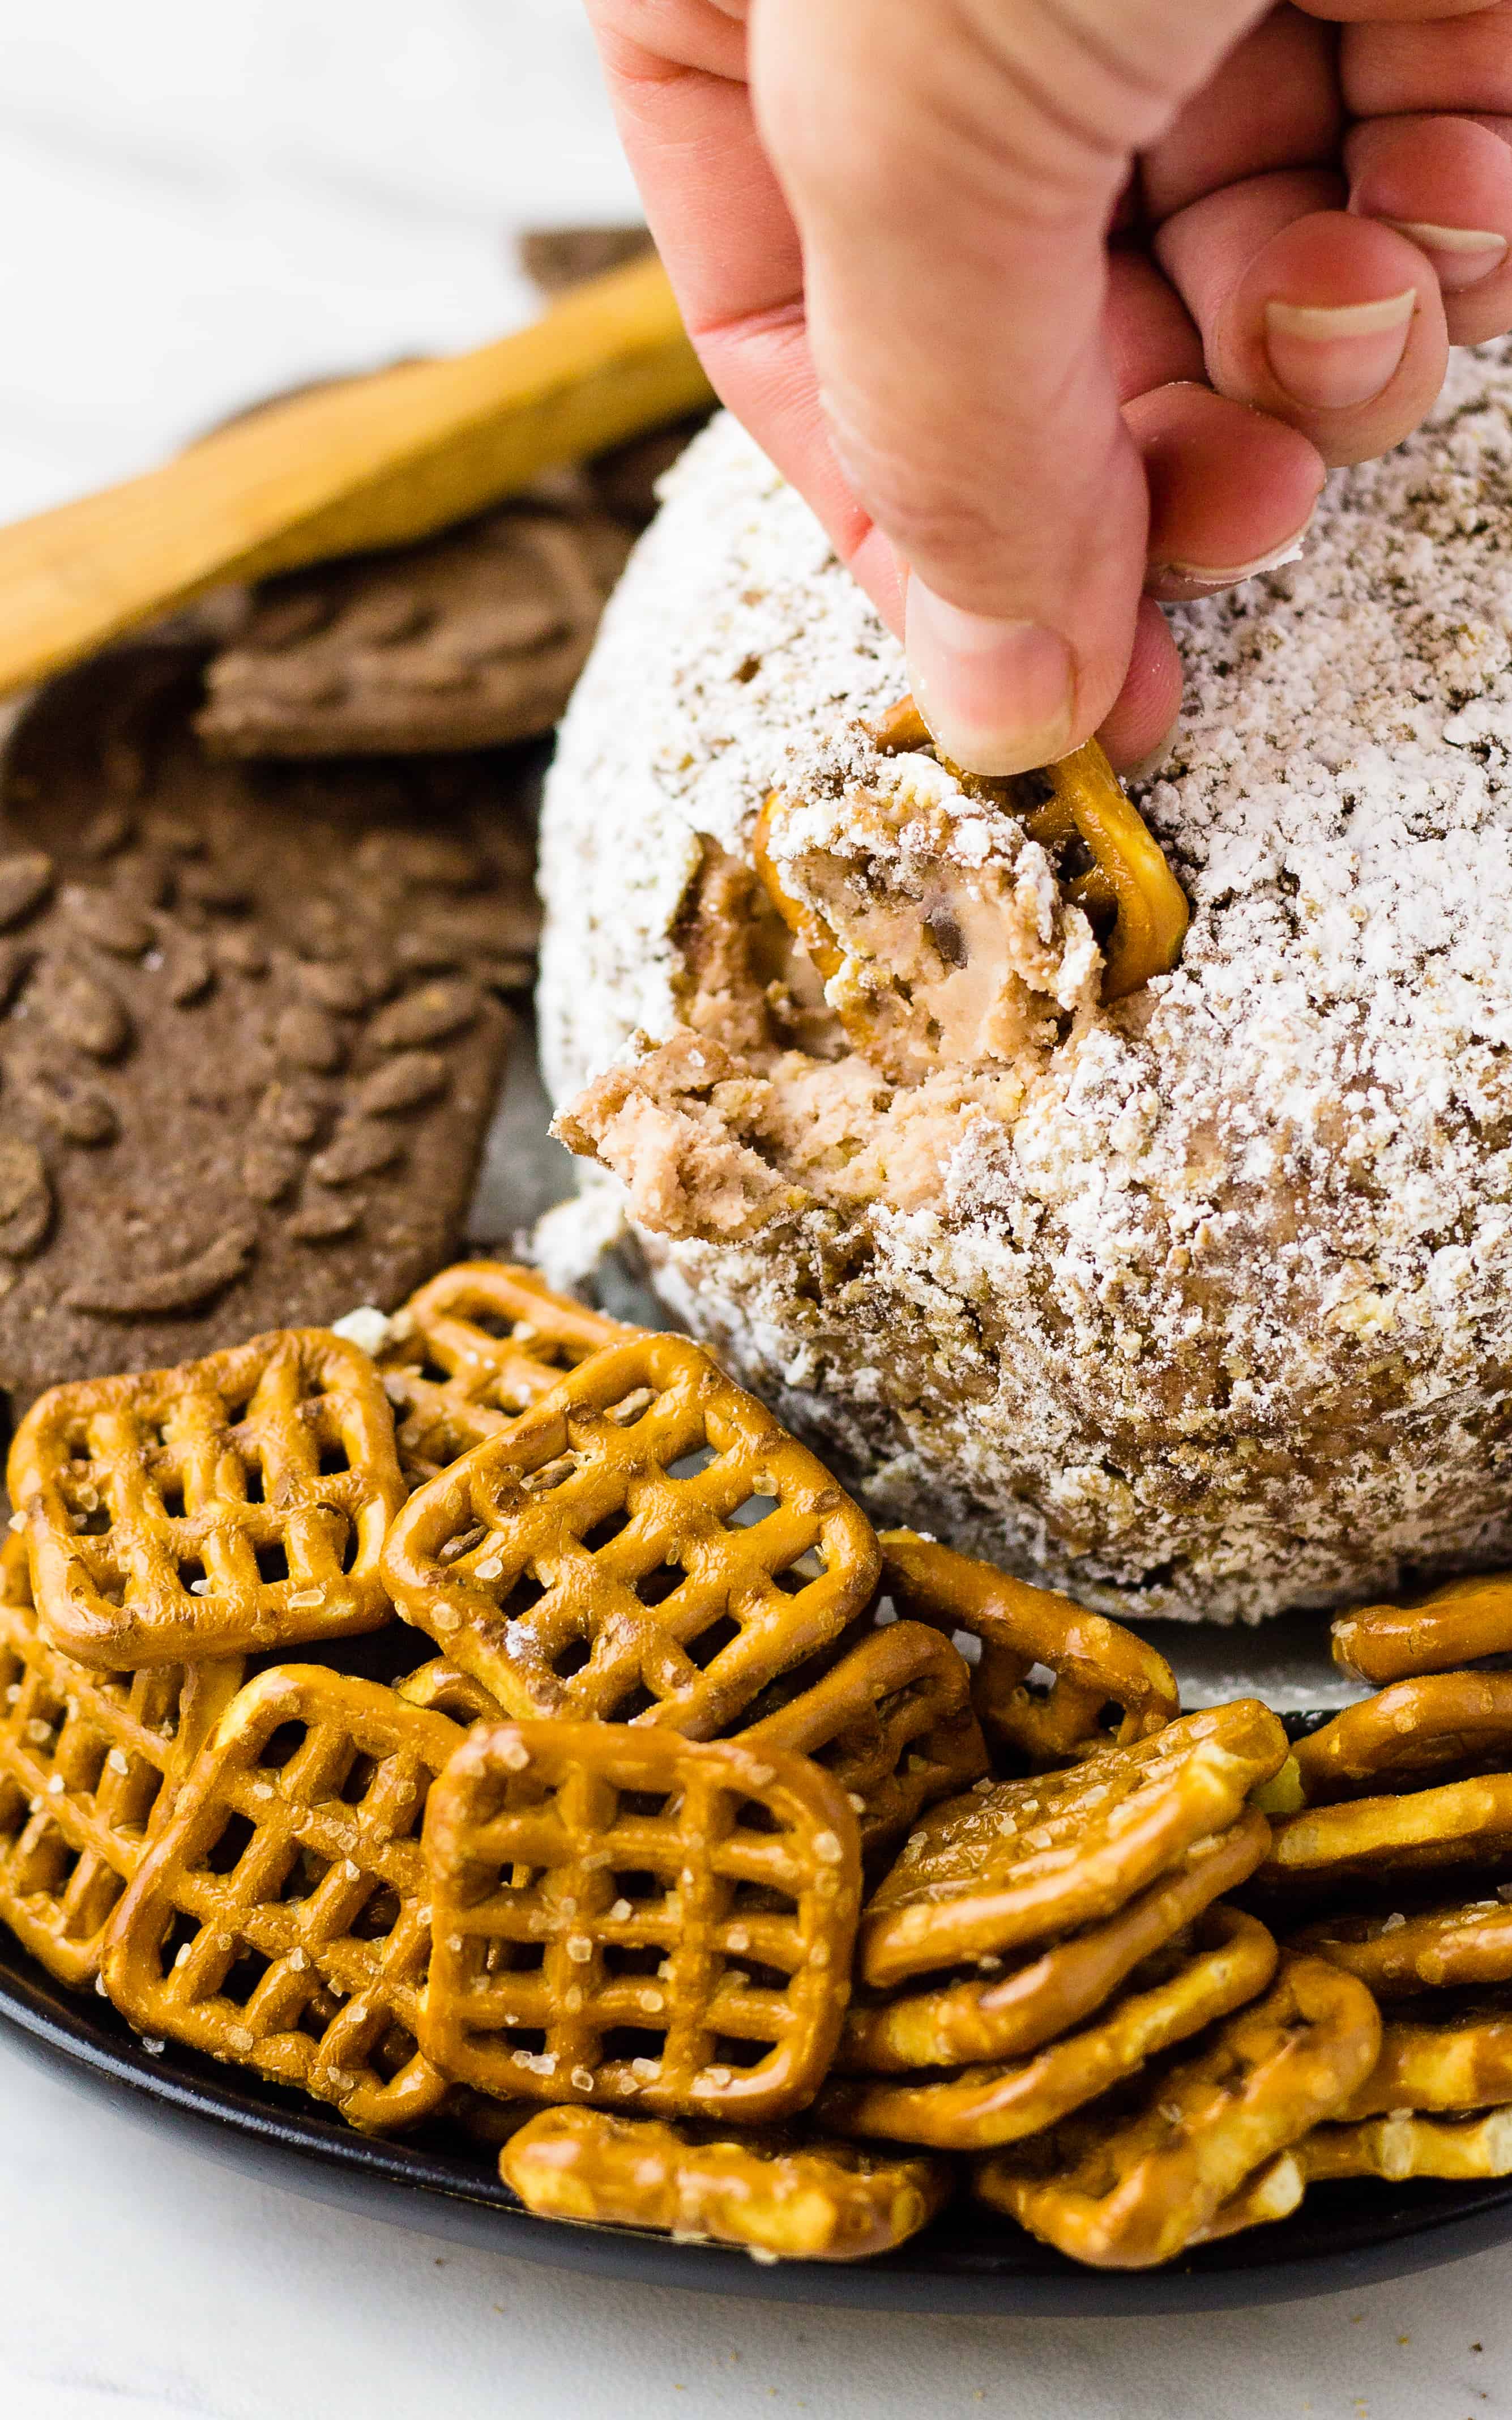 Hand dipping a Salted pretzels in to the cheese ball